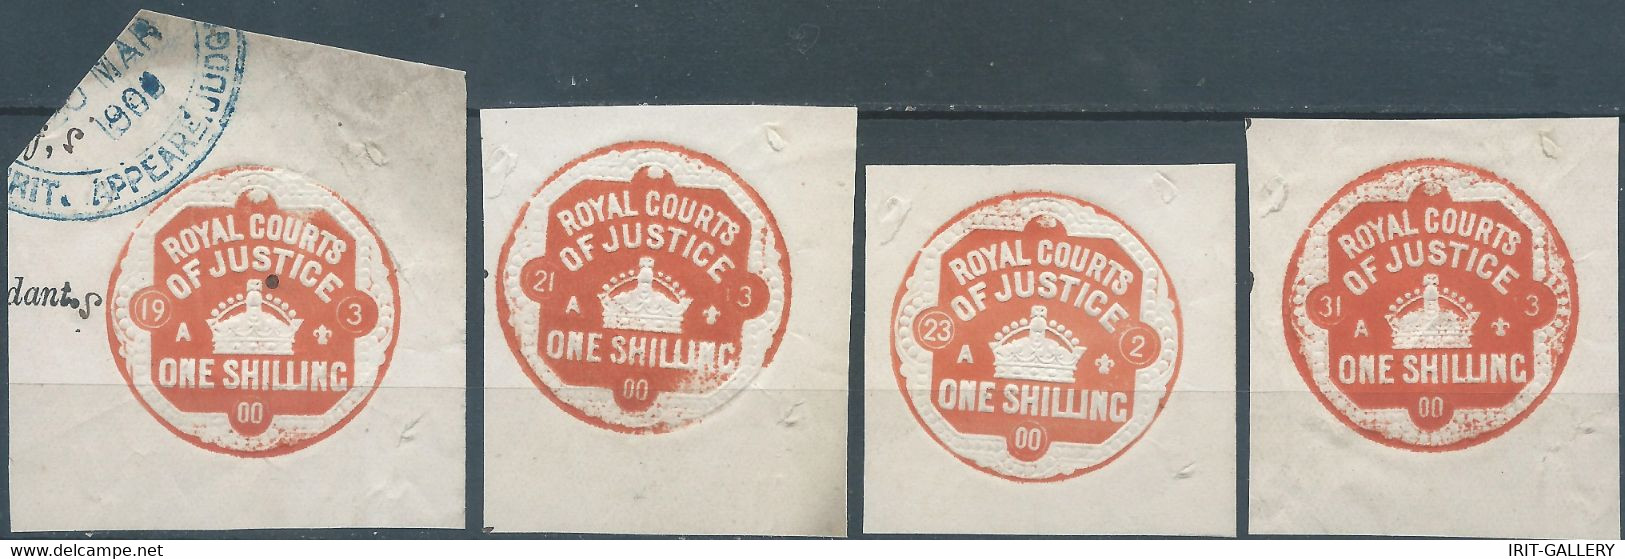 Great Britain-ENGLAND,1900 ,ROYAL COURTS OF JUSTICE, Tax Fee,Different Date Of The Day Of The Month,1 SHILLING - Fiscaux